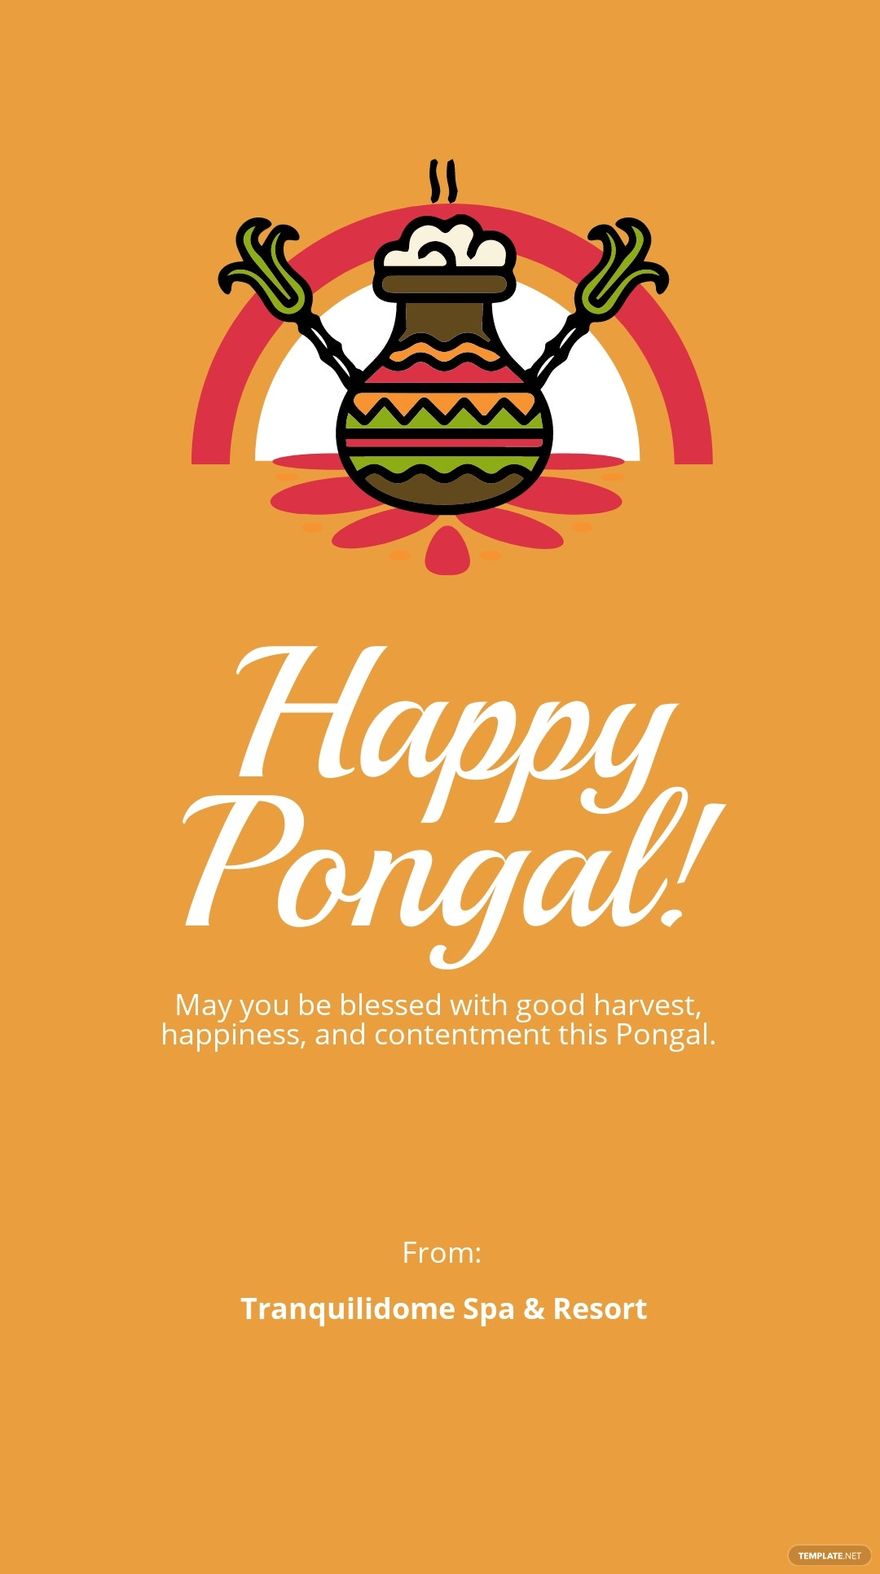 Free Pongal Quote Snapchat Geofilter Template